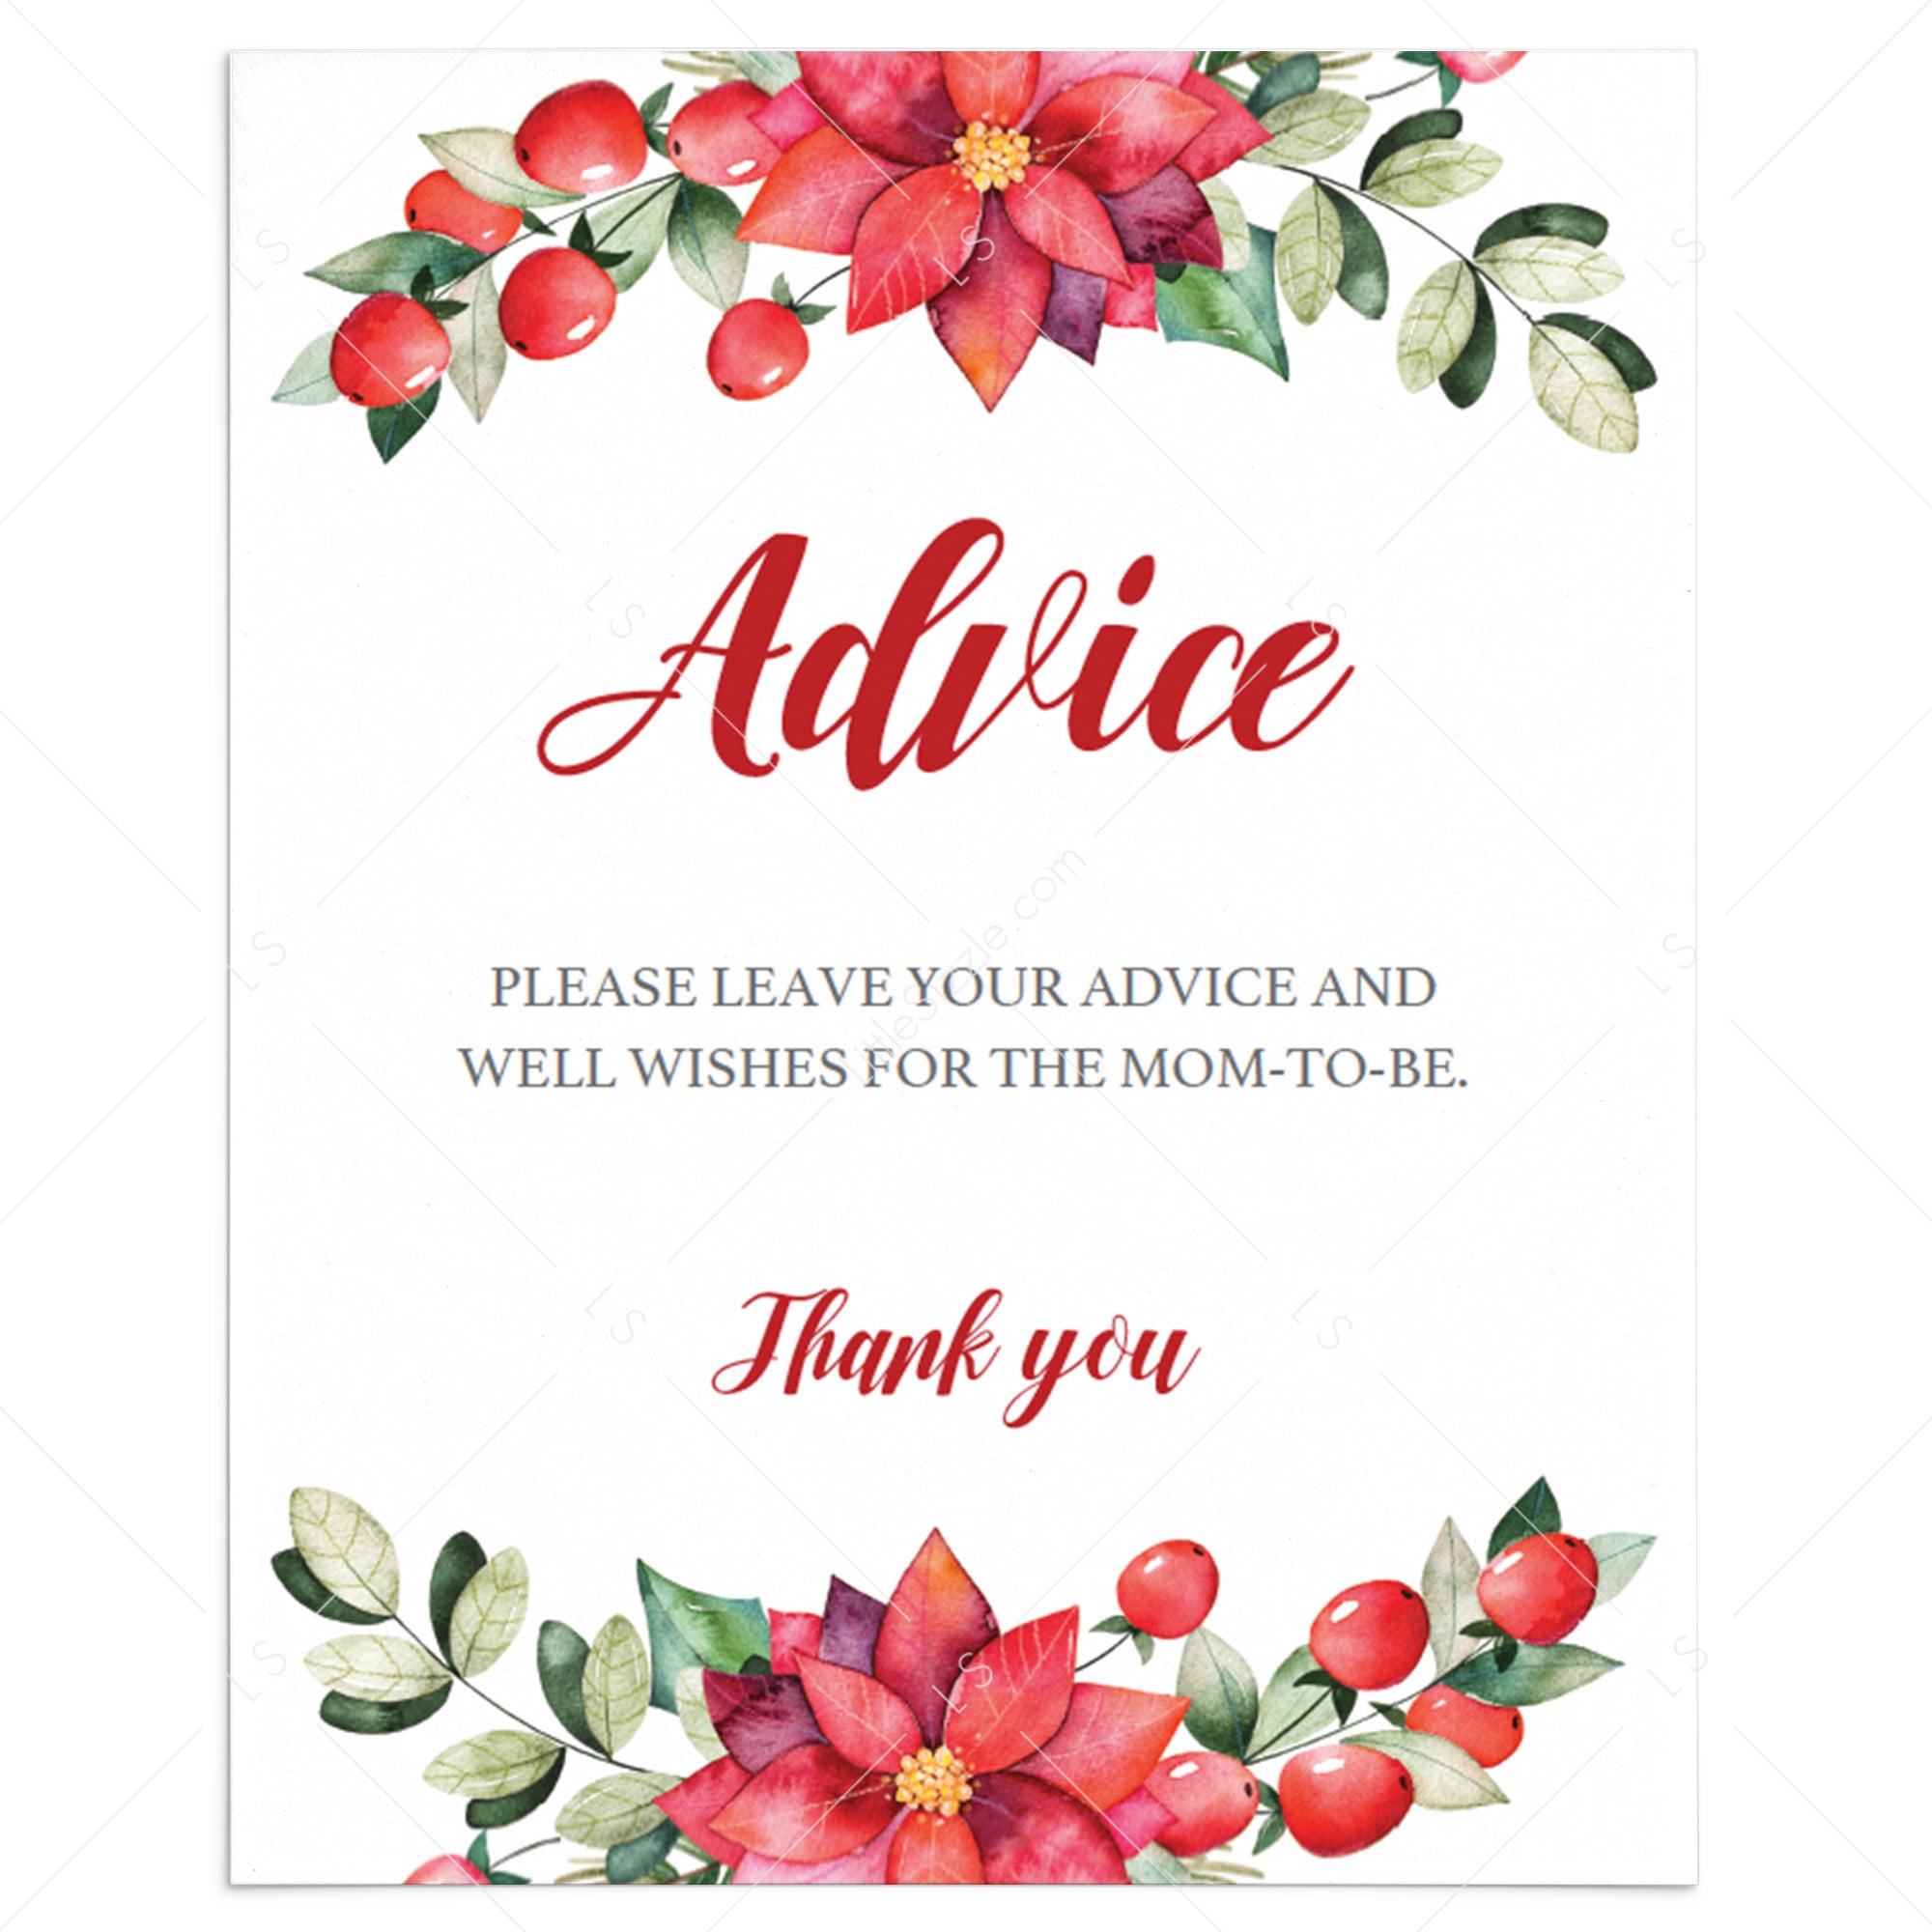 Red and Greenery Baby Shower Advice Sign Template by LittleSizzle